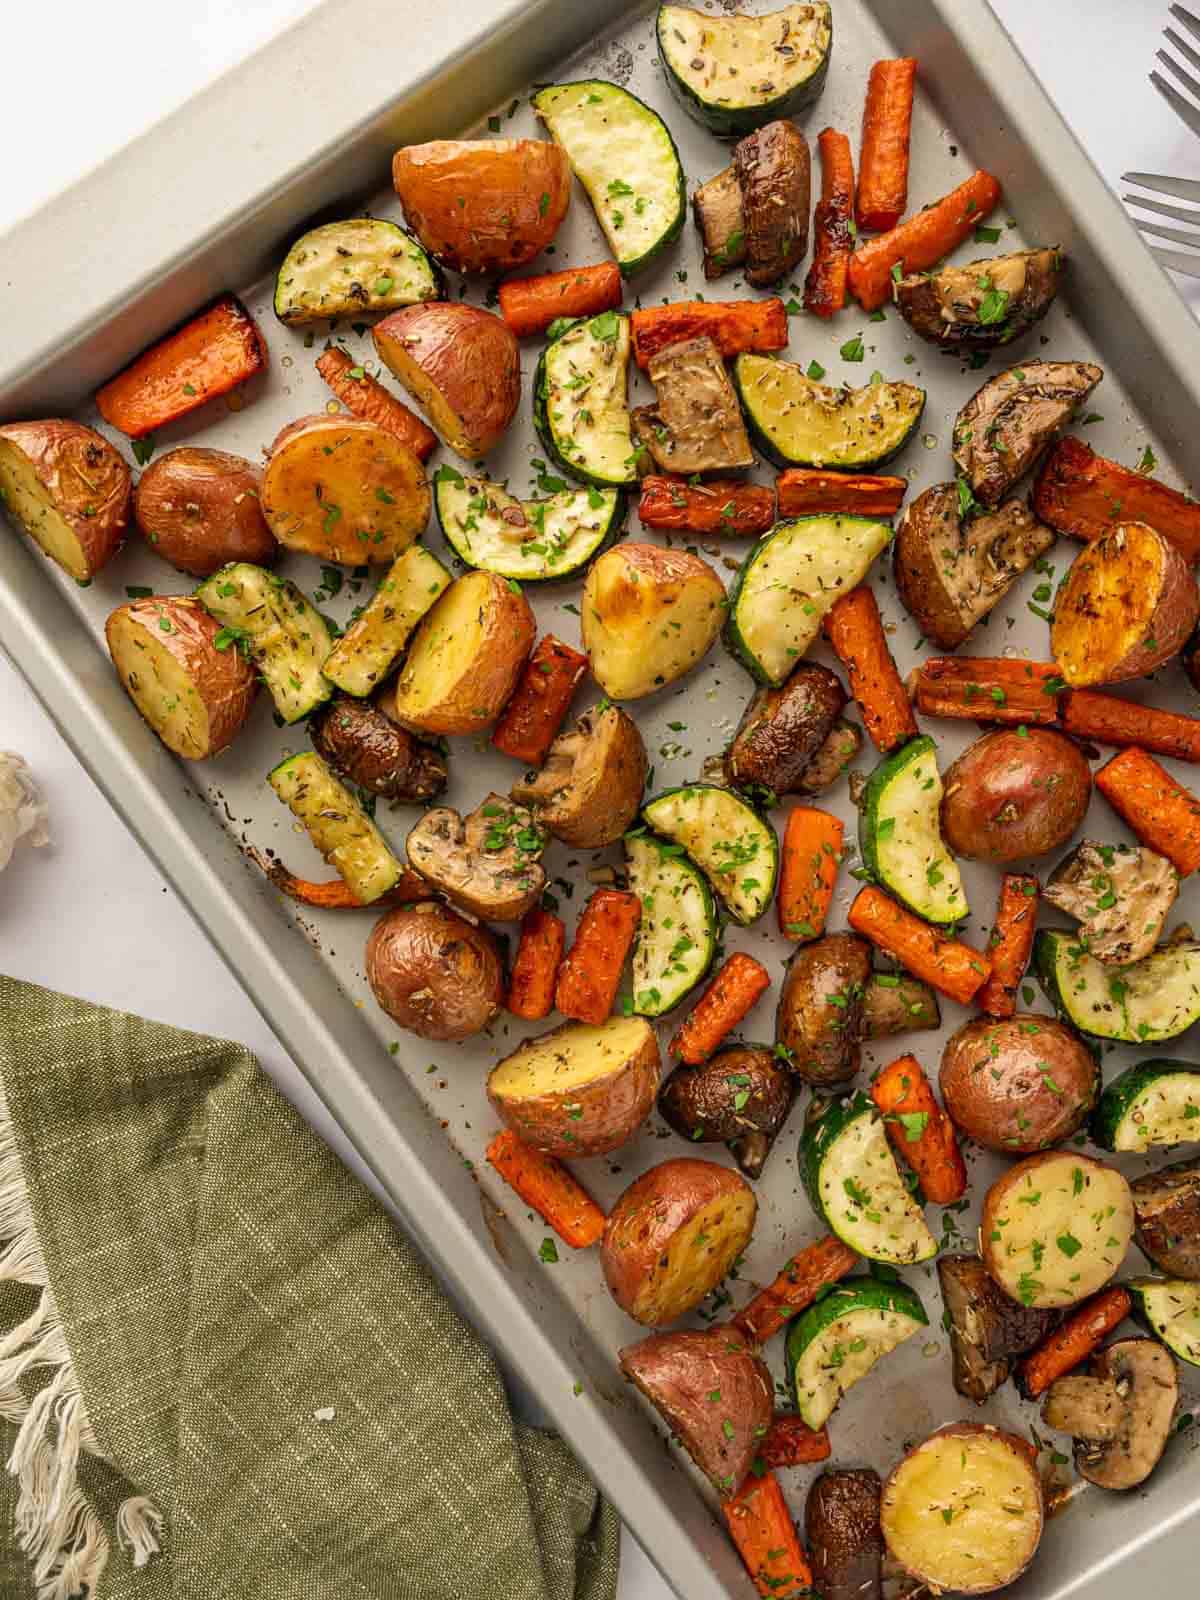 Roasted vegetables are on a baking tray.